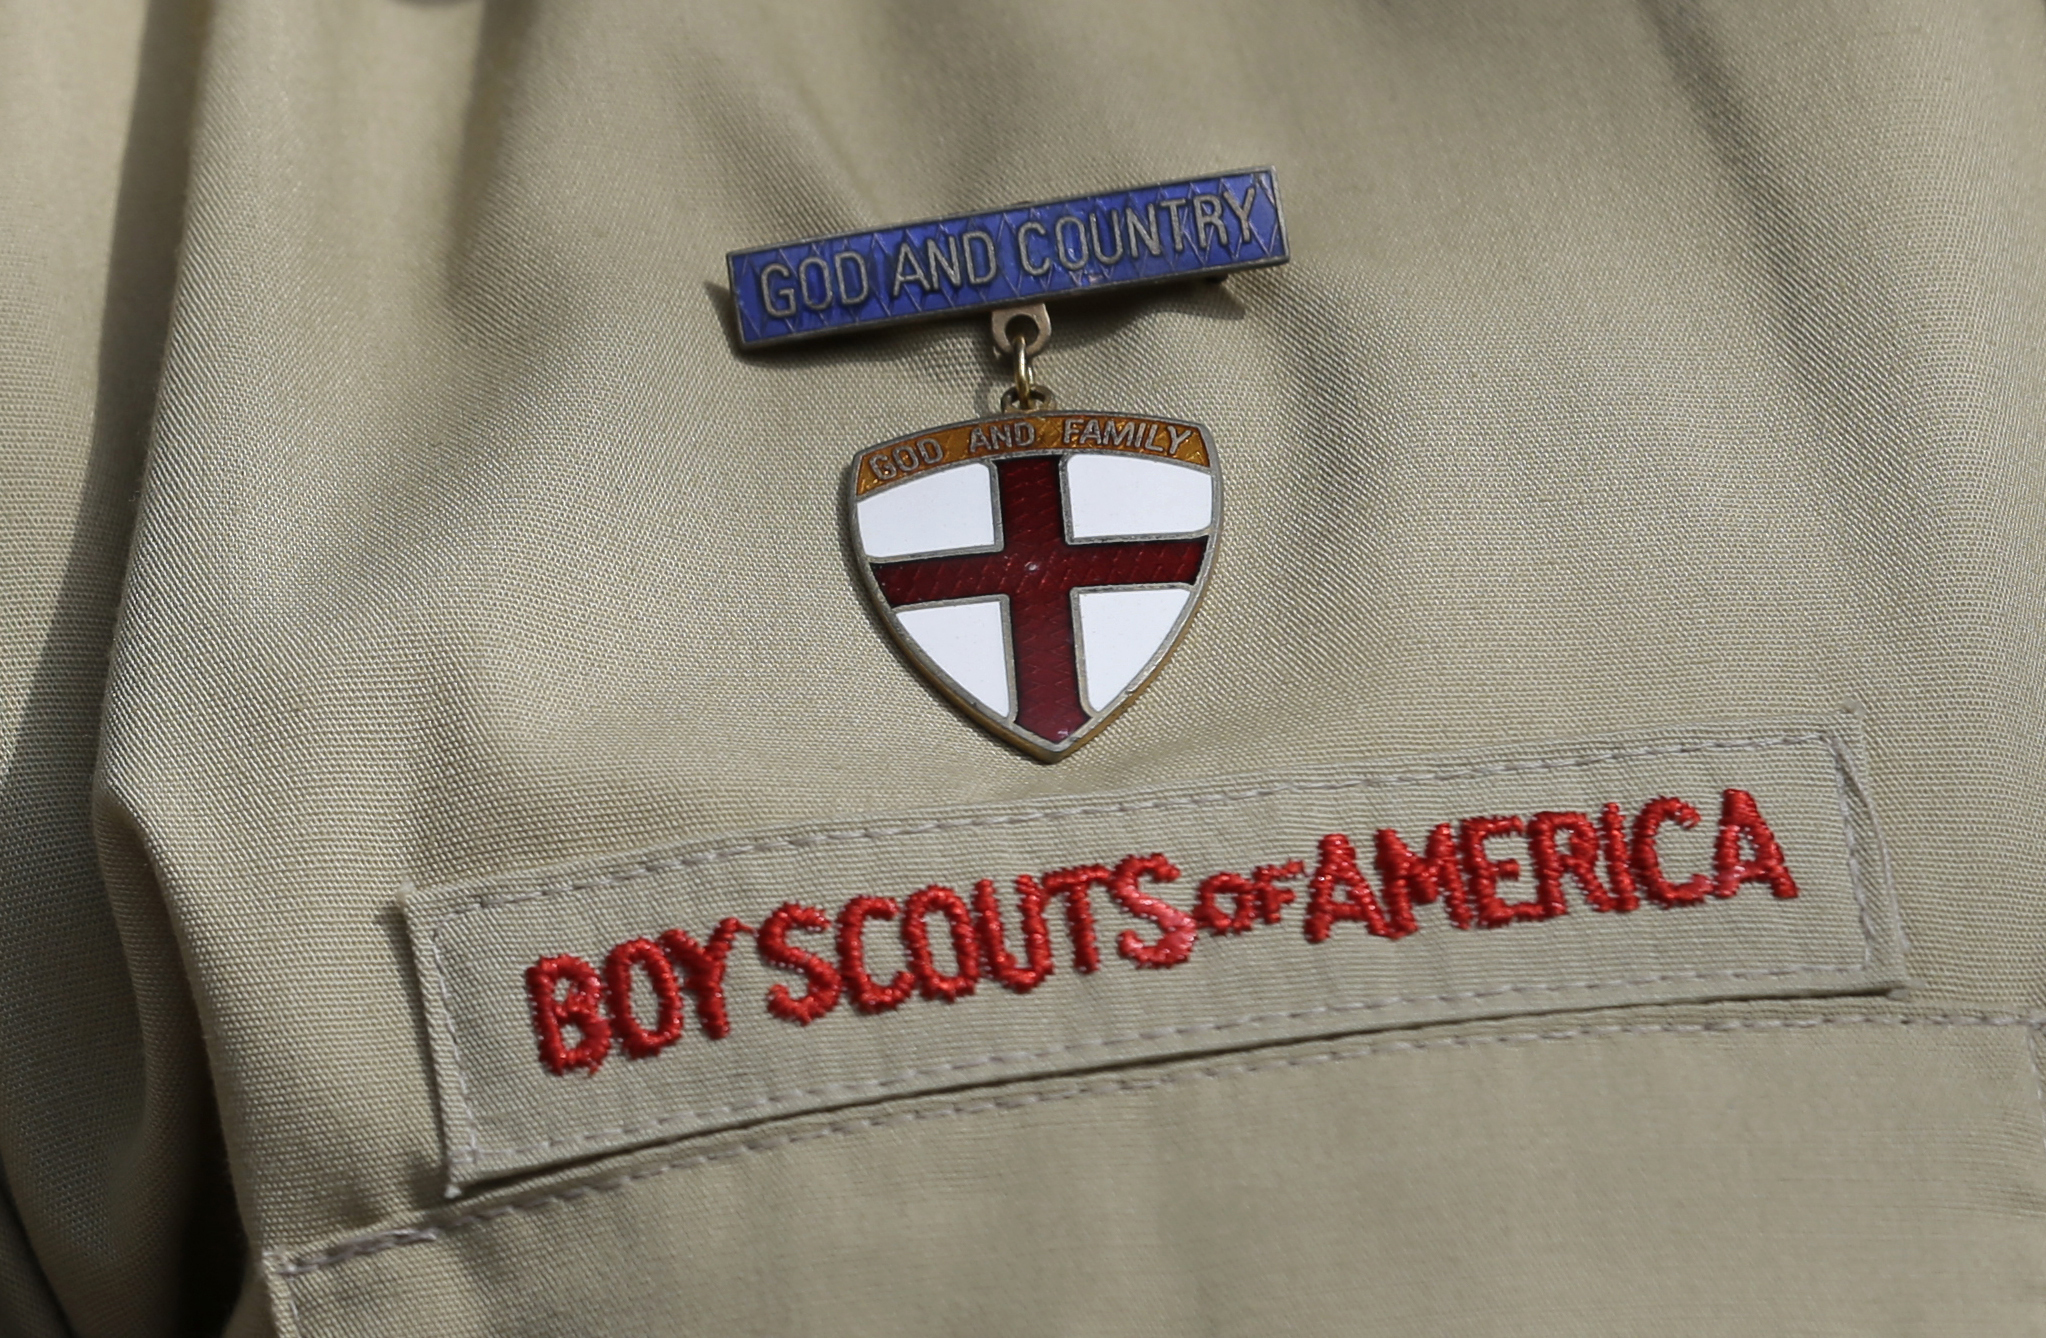 The Full Download on Scouts BSA Uniforms